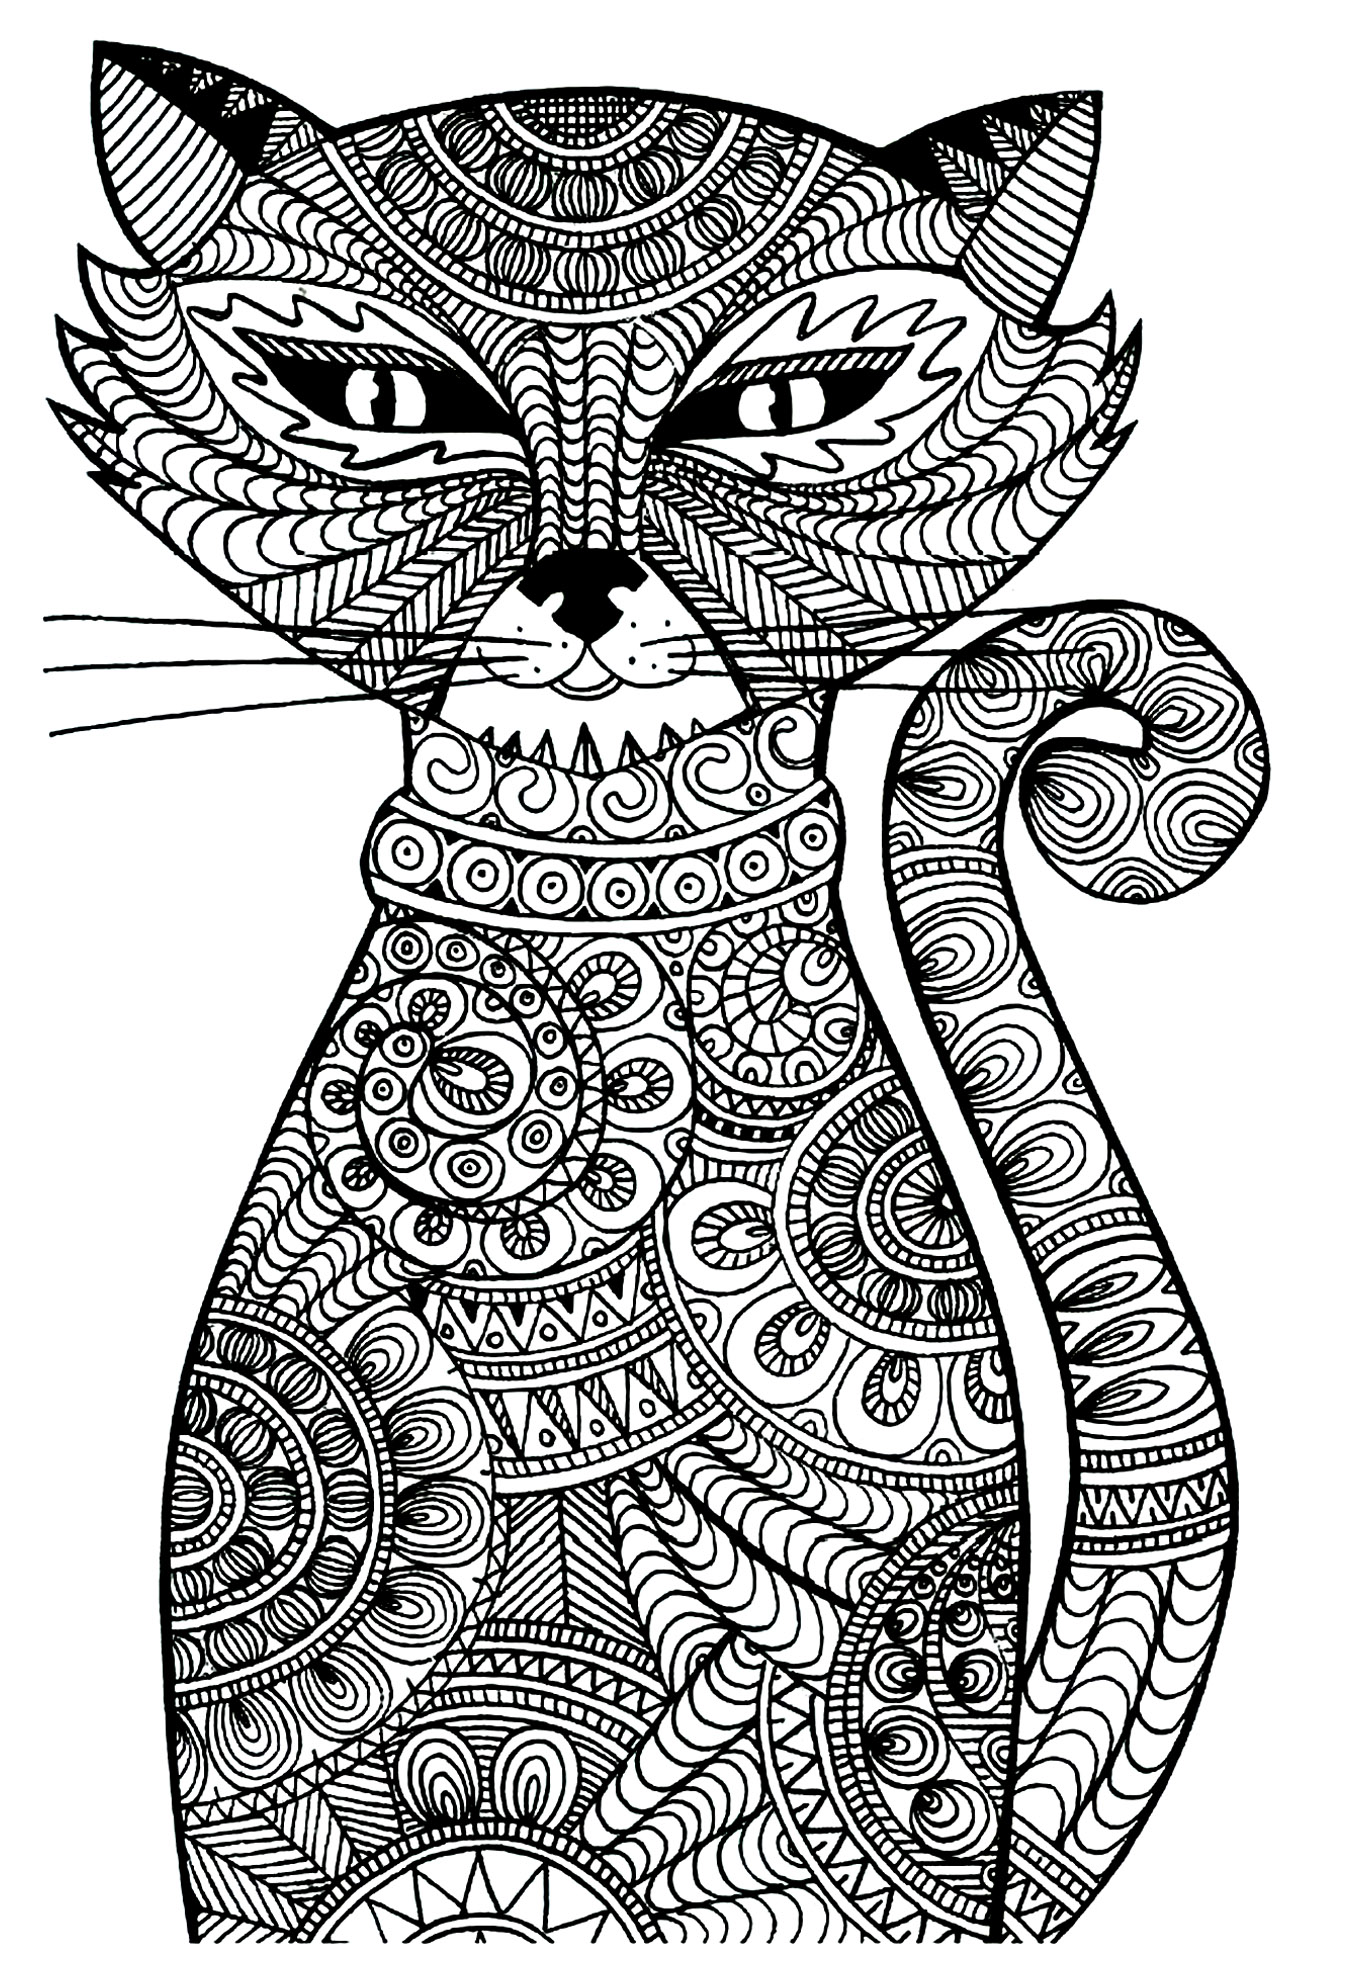 Animals - Coloring pages for adults : coloring-adult-cat